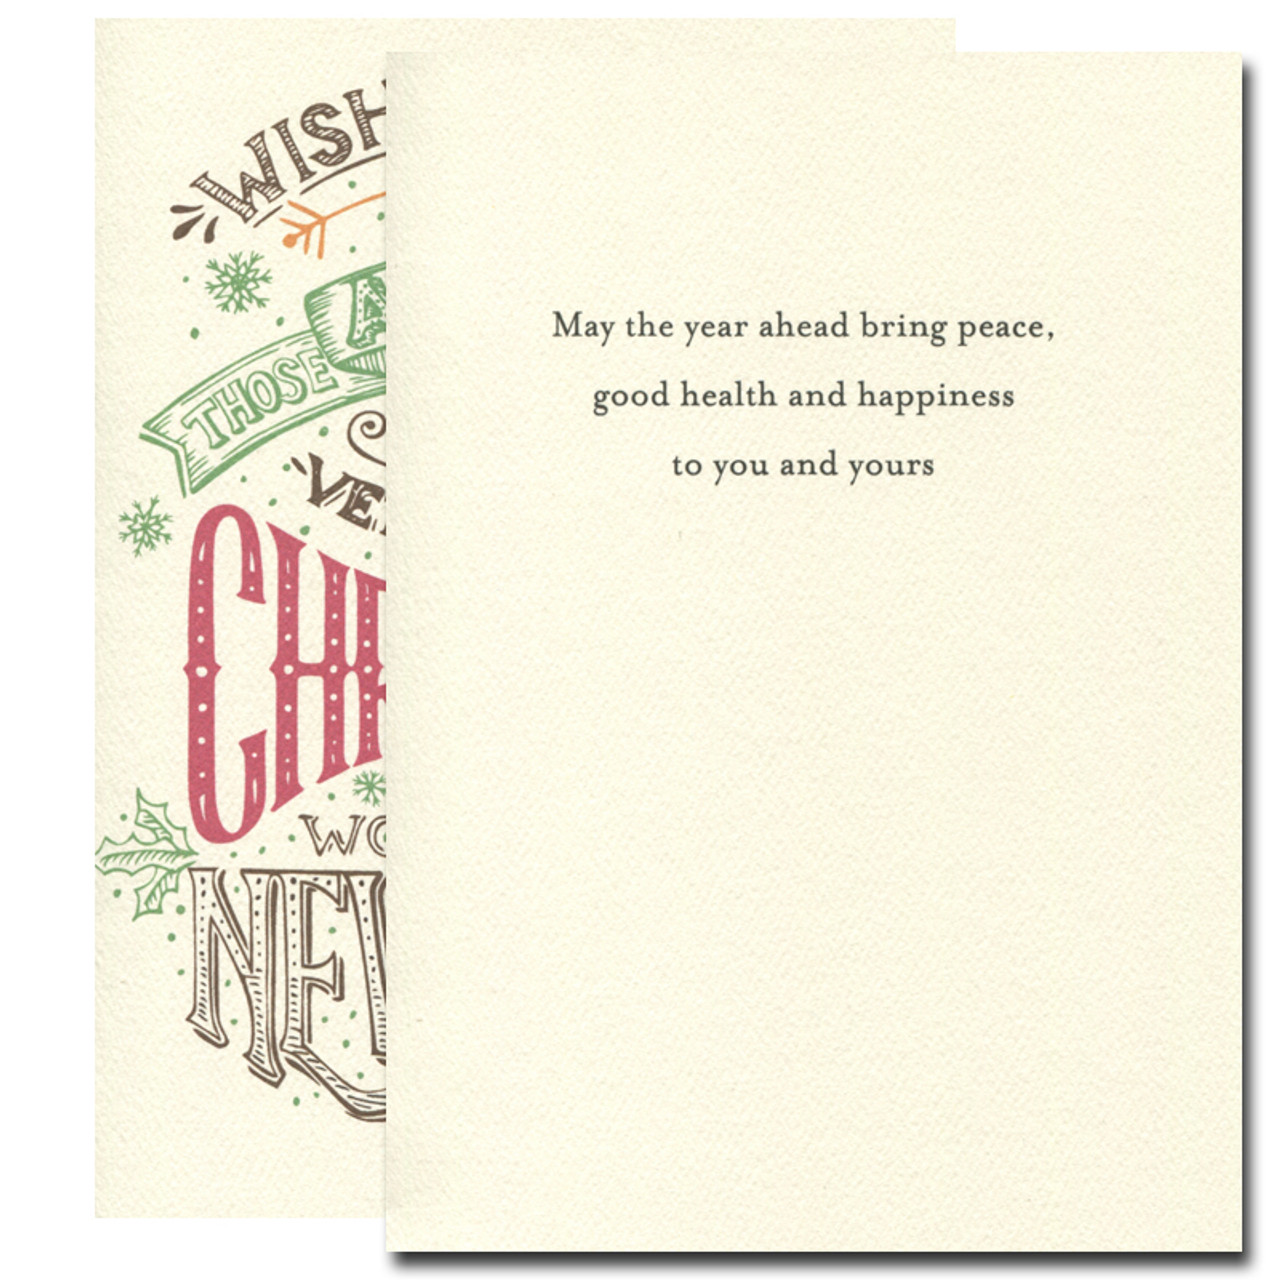 Very Merry Holiday Card inside reads: May the year ahead bring peace, good health and happiness to you and yours